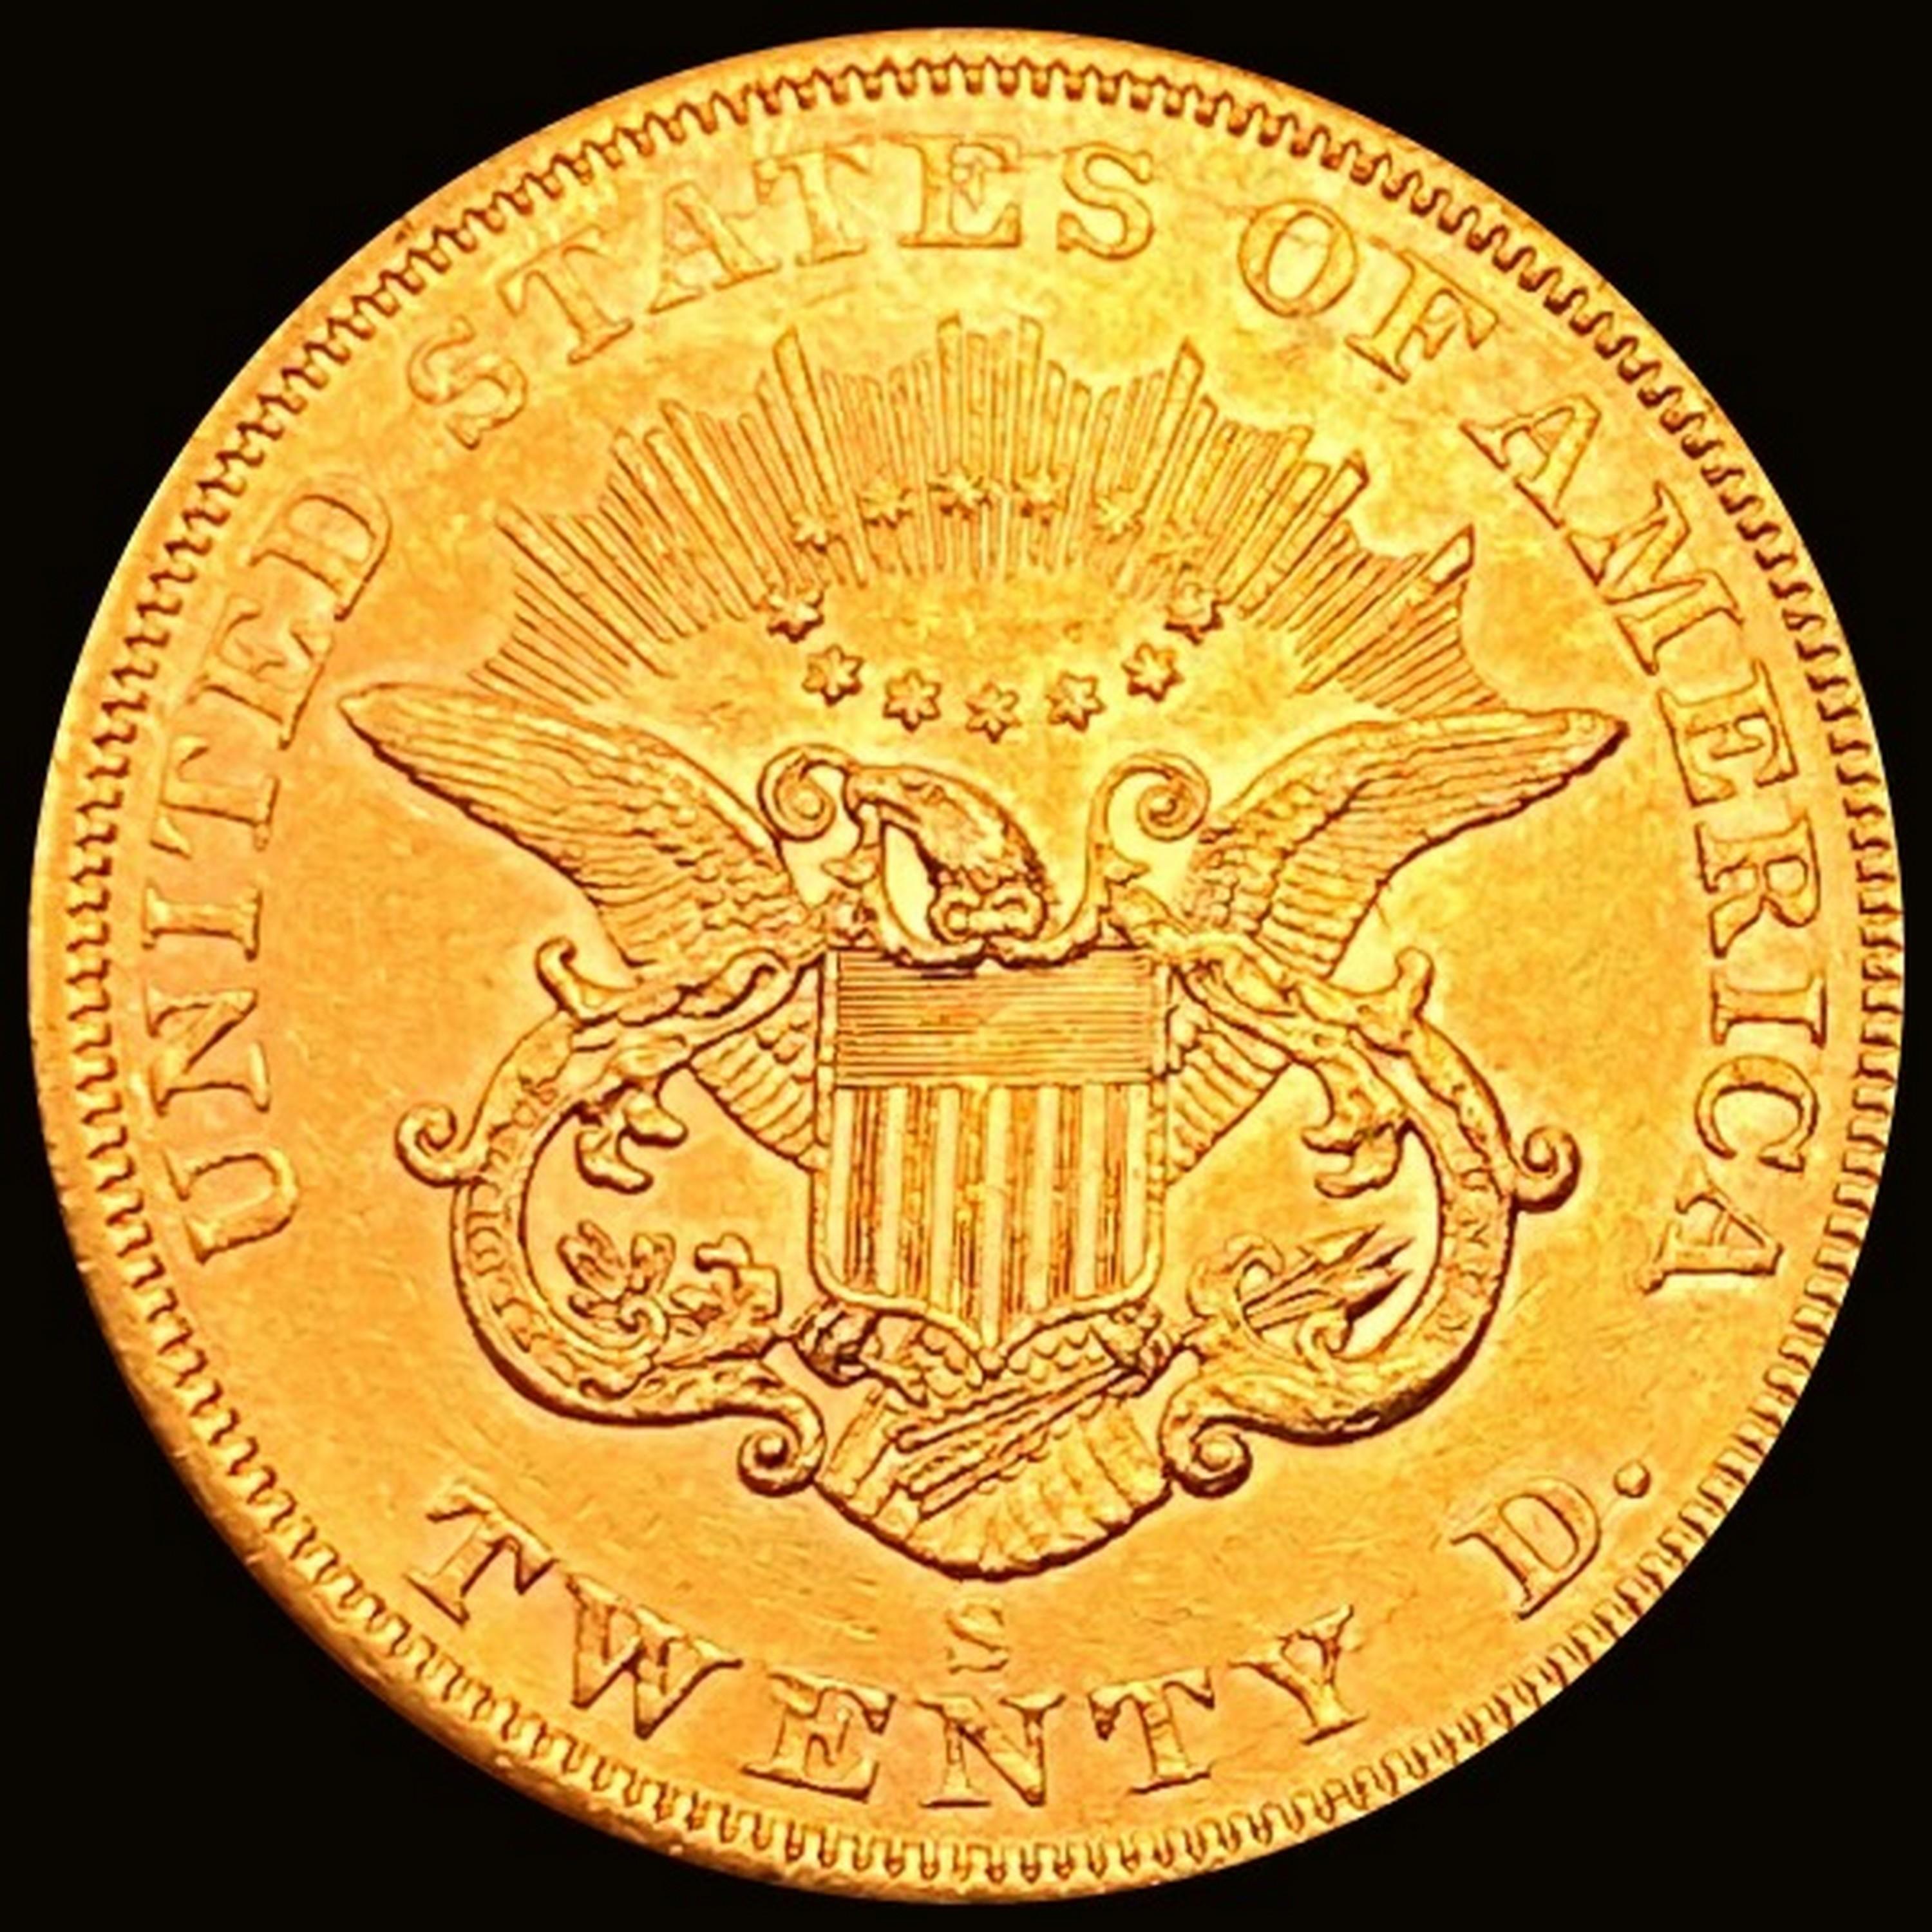 1861-S $20 Gold Double Eagle UNCIRCULATED